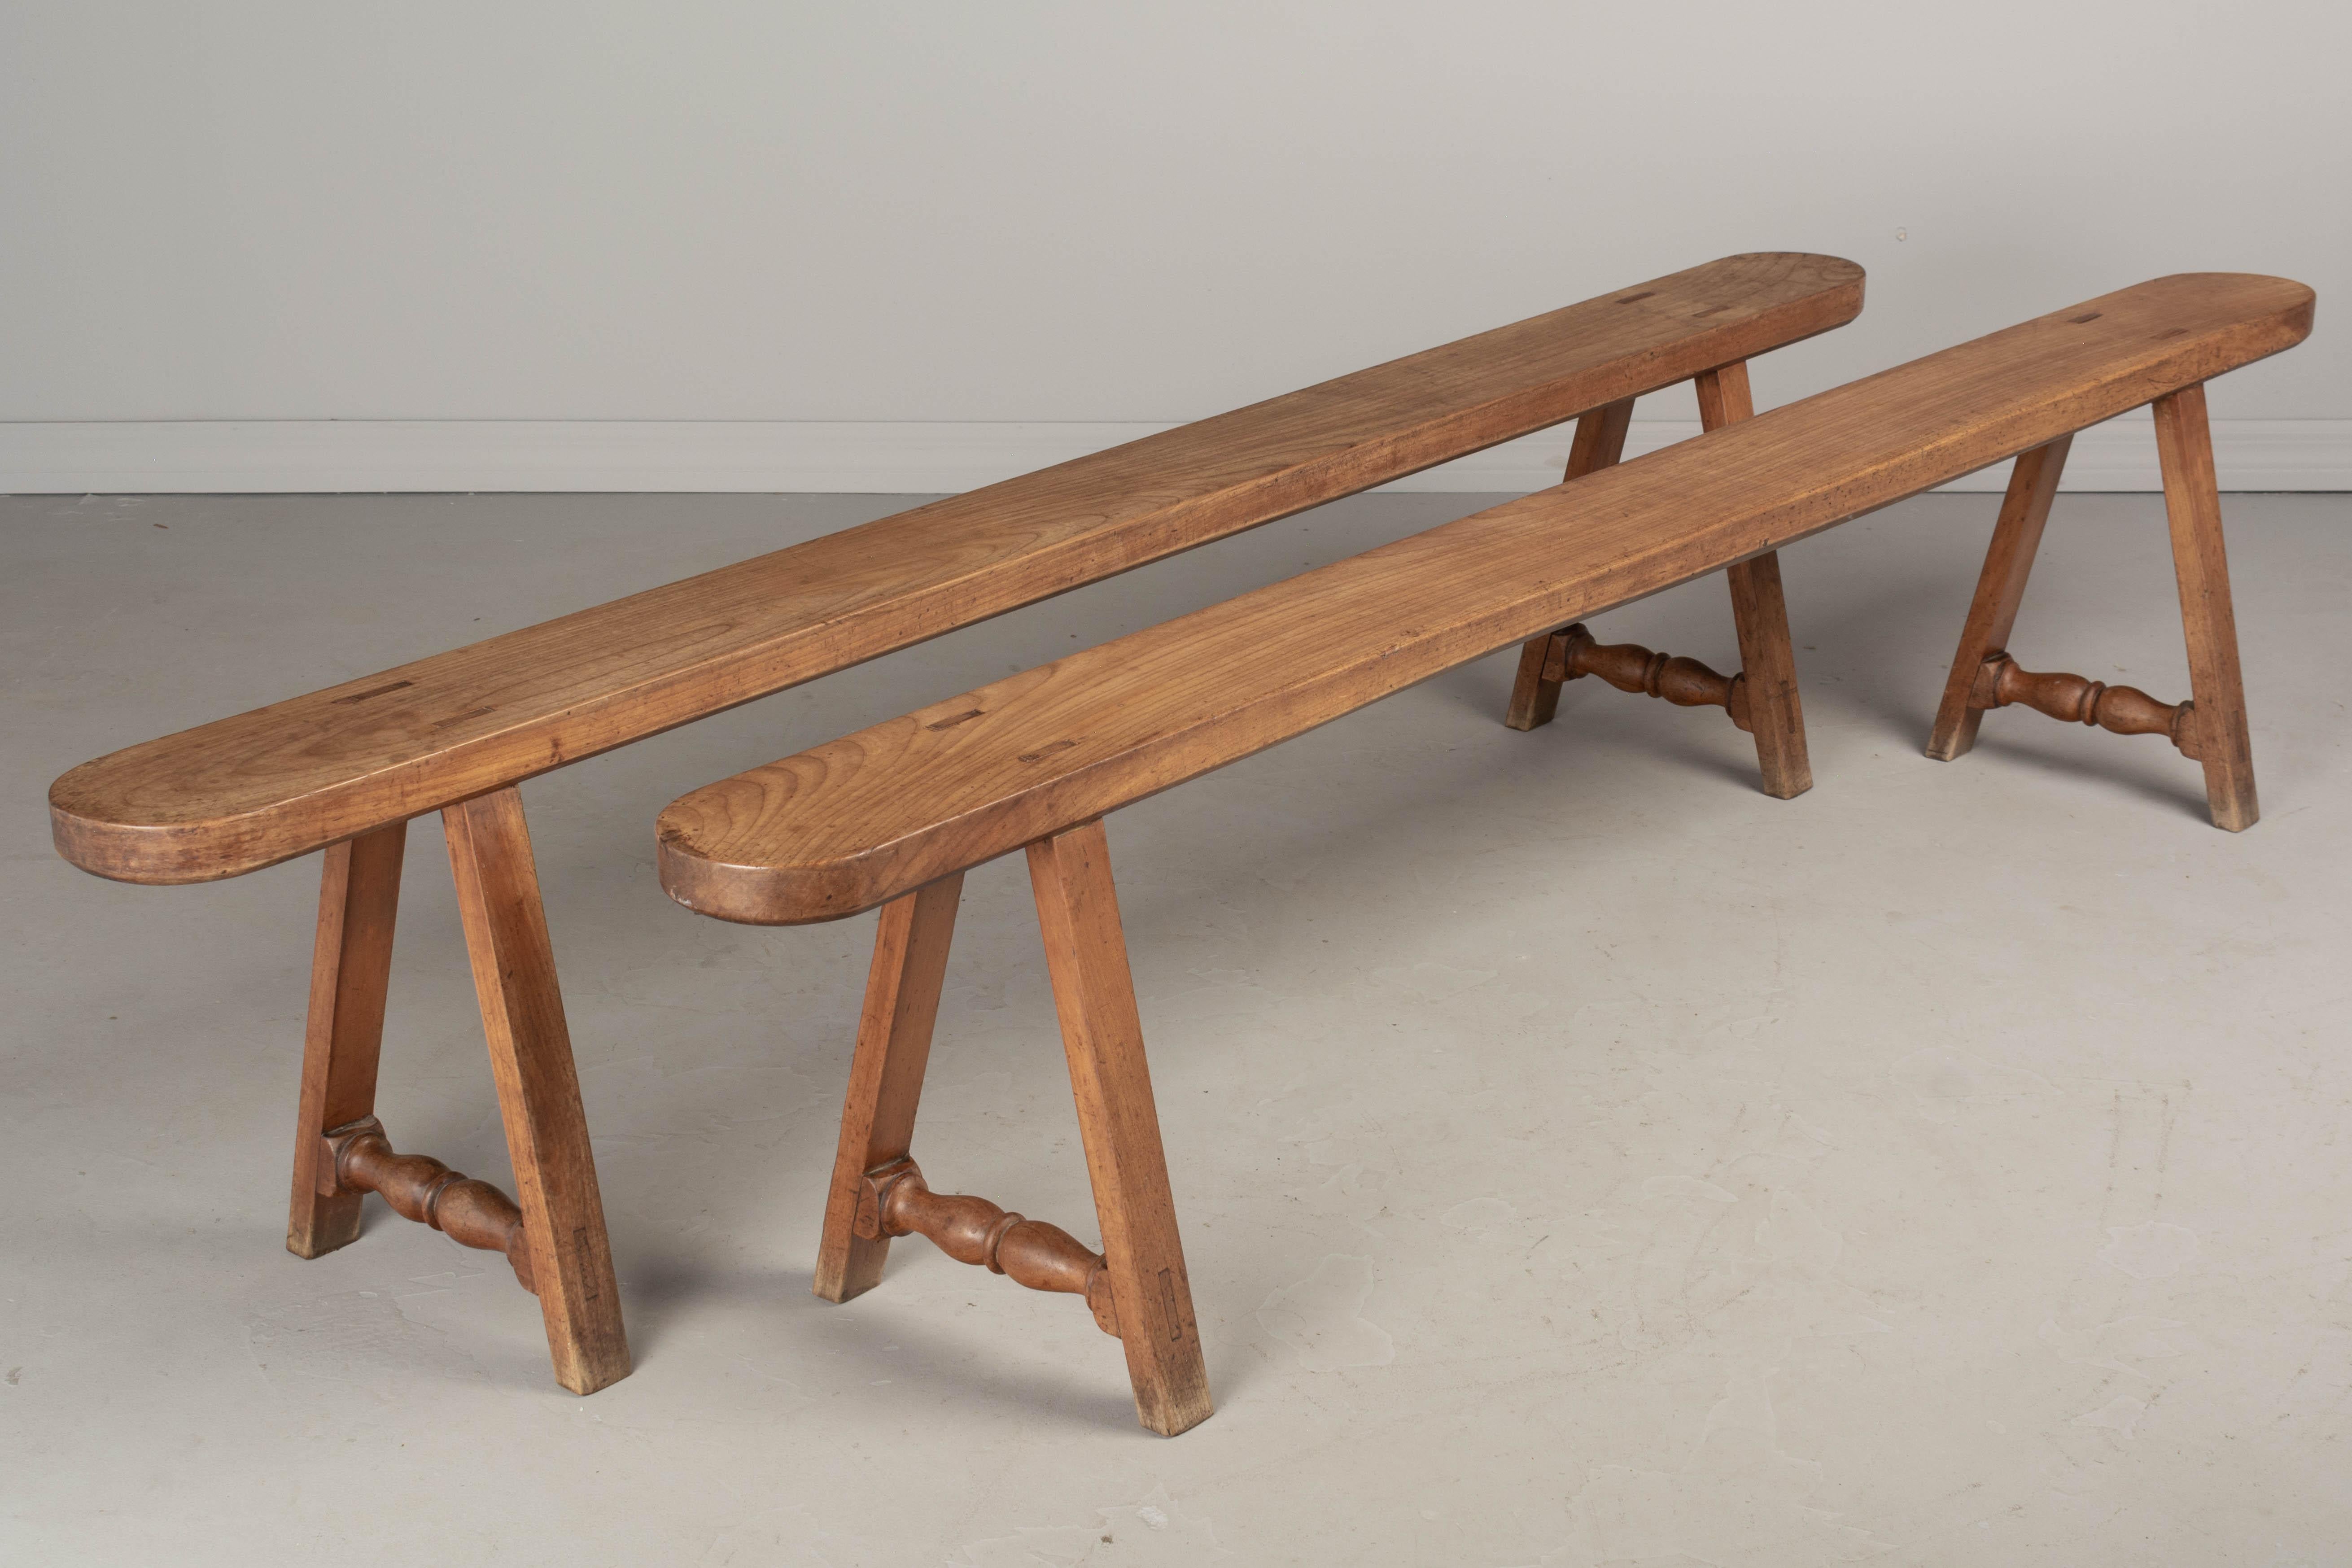 A pair of Country French benches from Normandy made of solid cherry wood. Sturdy craftsmanship with mortise and tenon construction. Waxed finish. Circa 1900s. 79